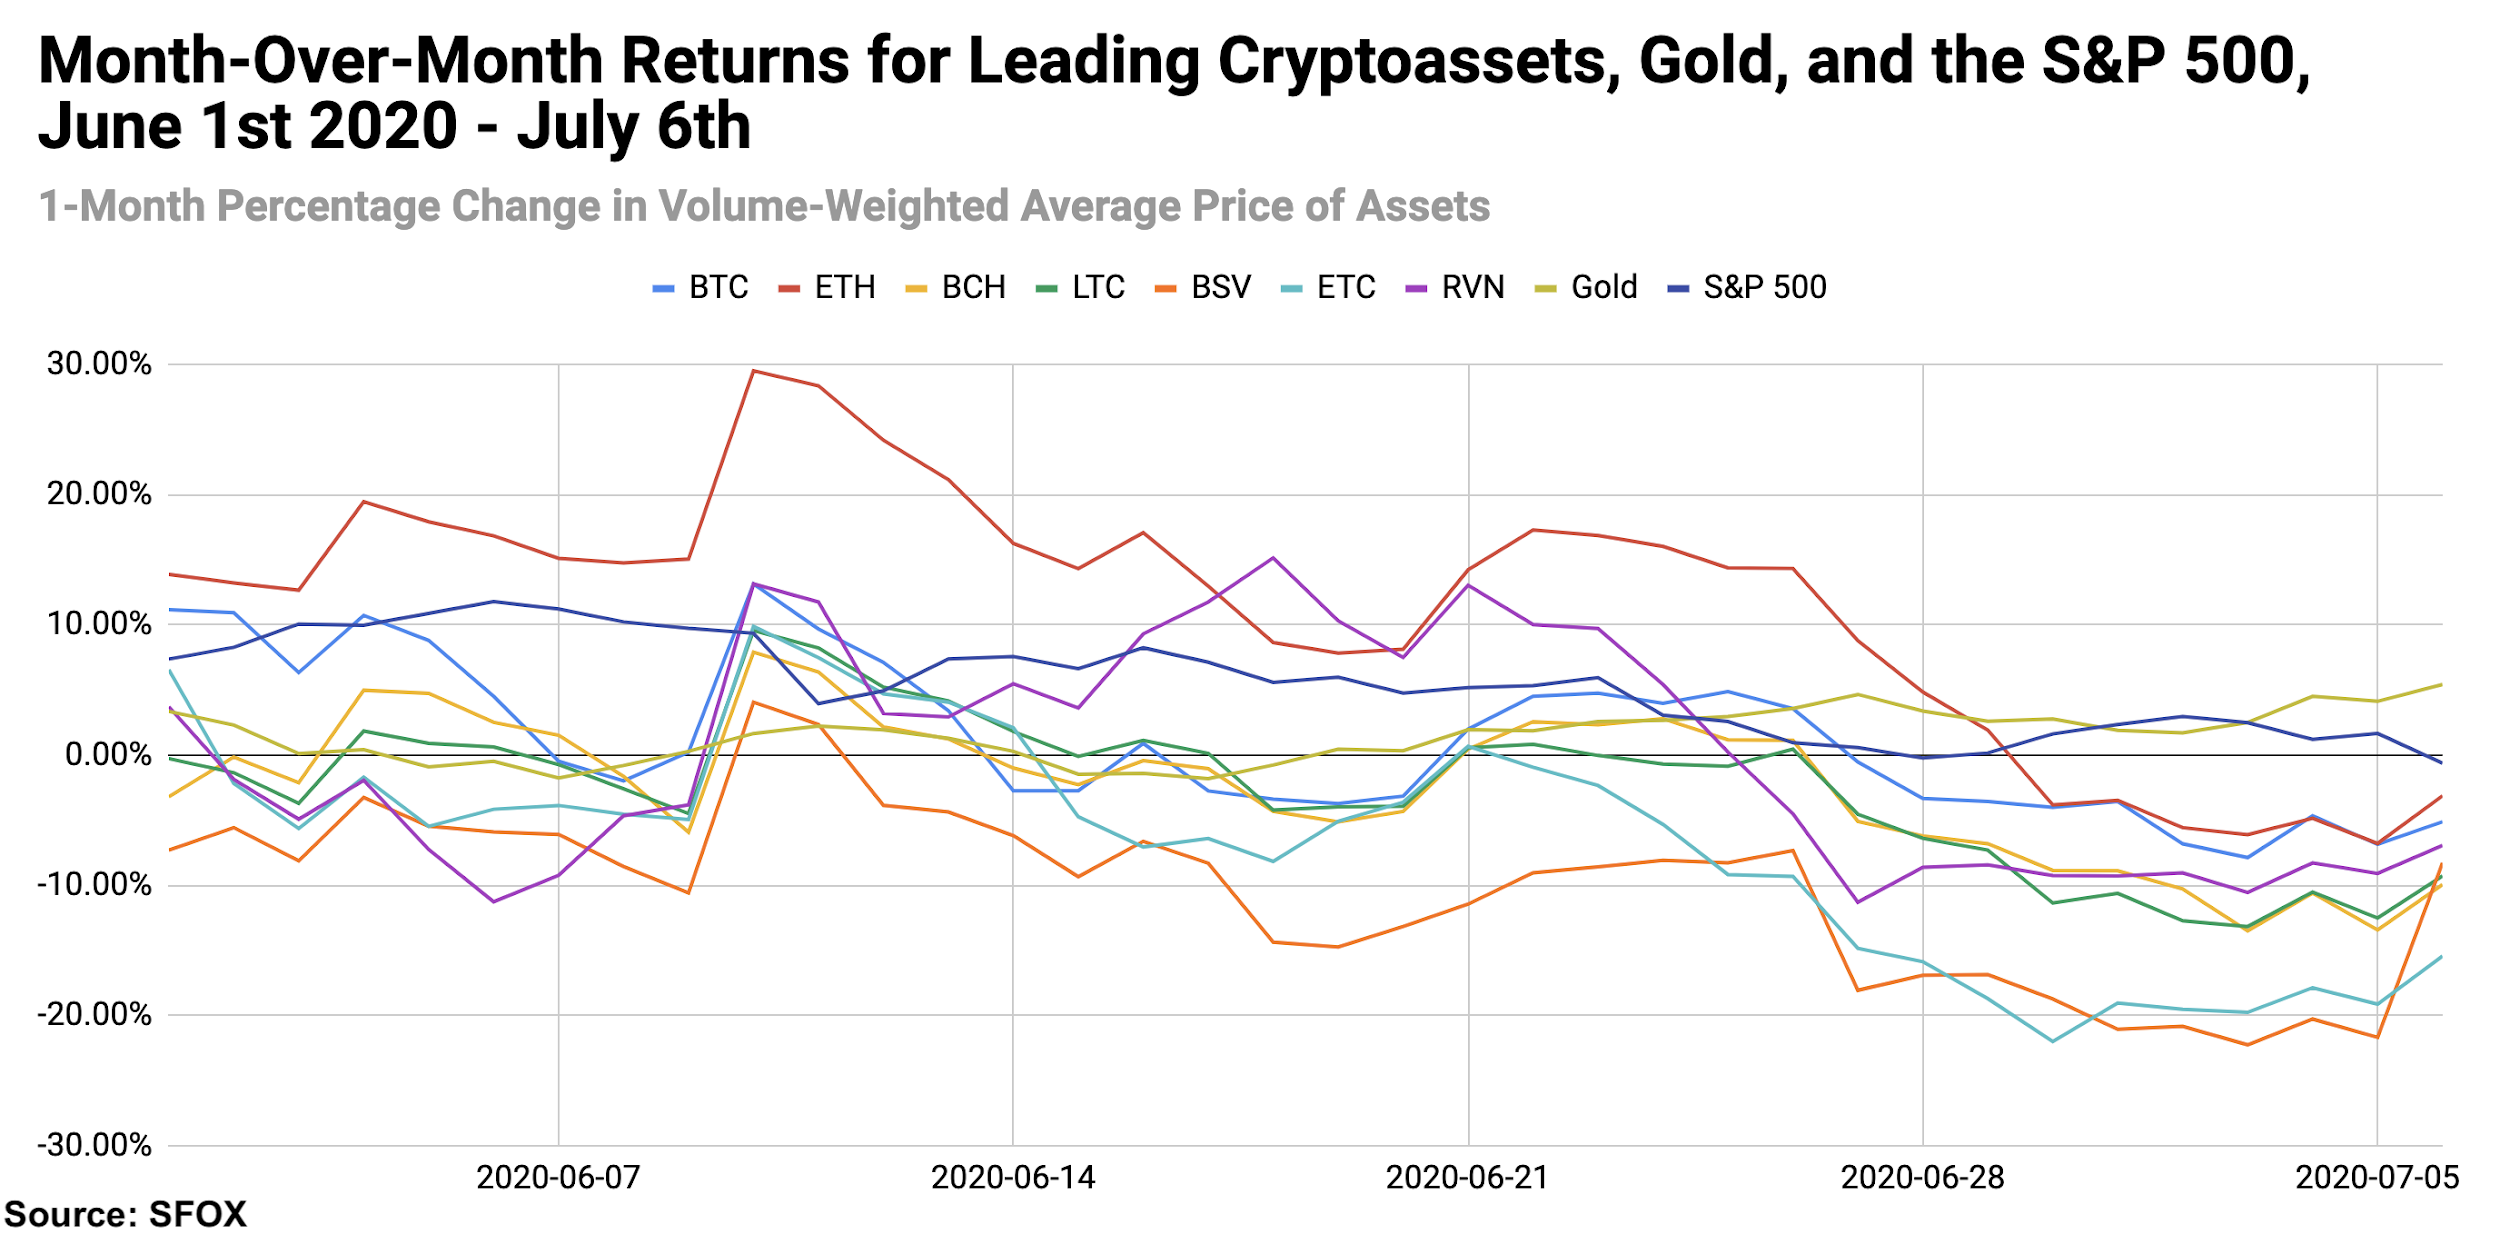 Bitcoin crypto S&P 500 gold monthly returns data July 2020.